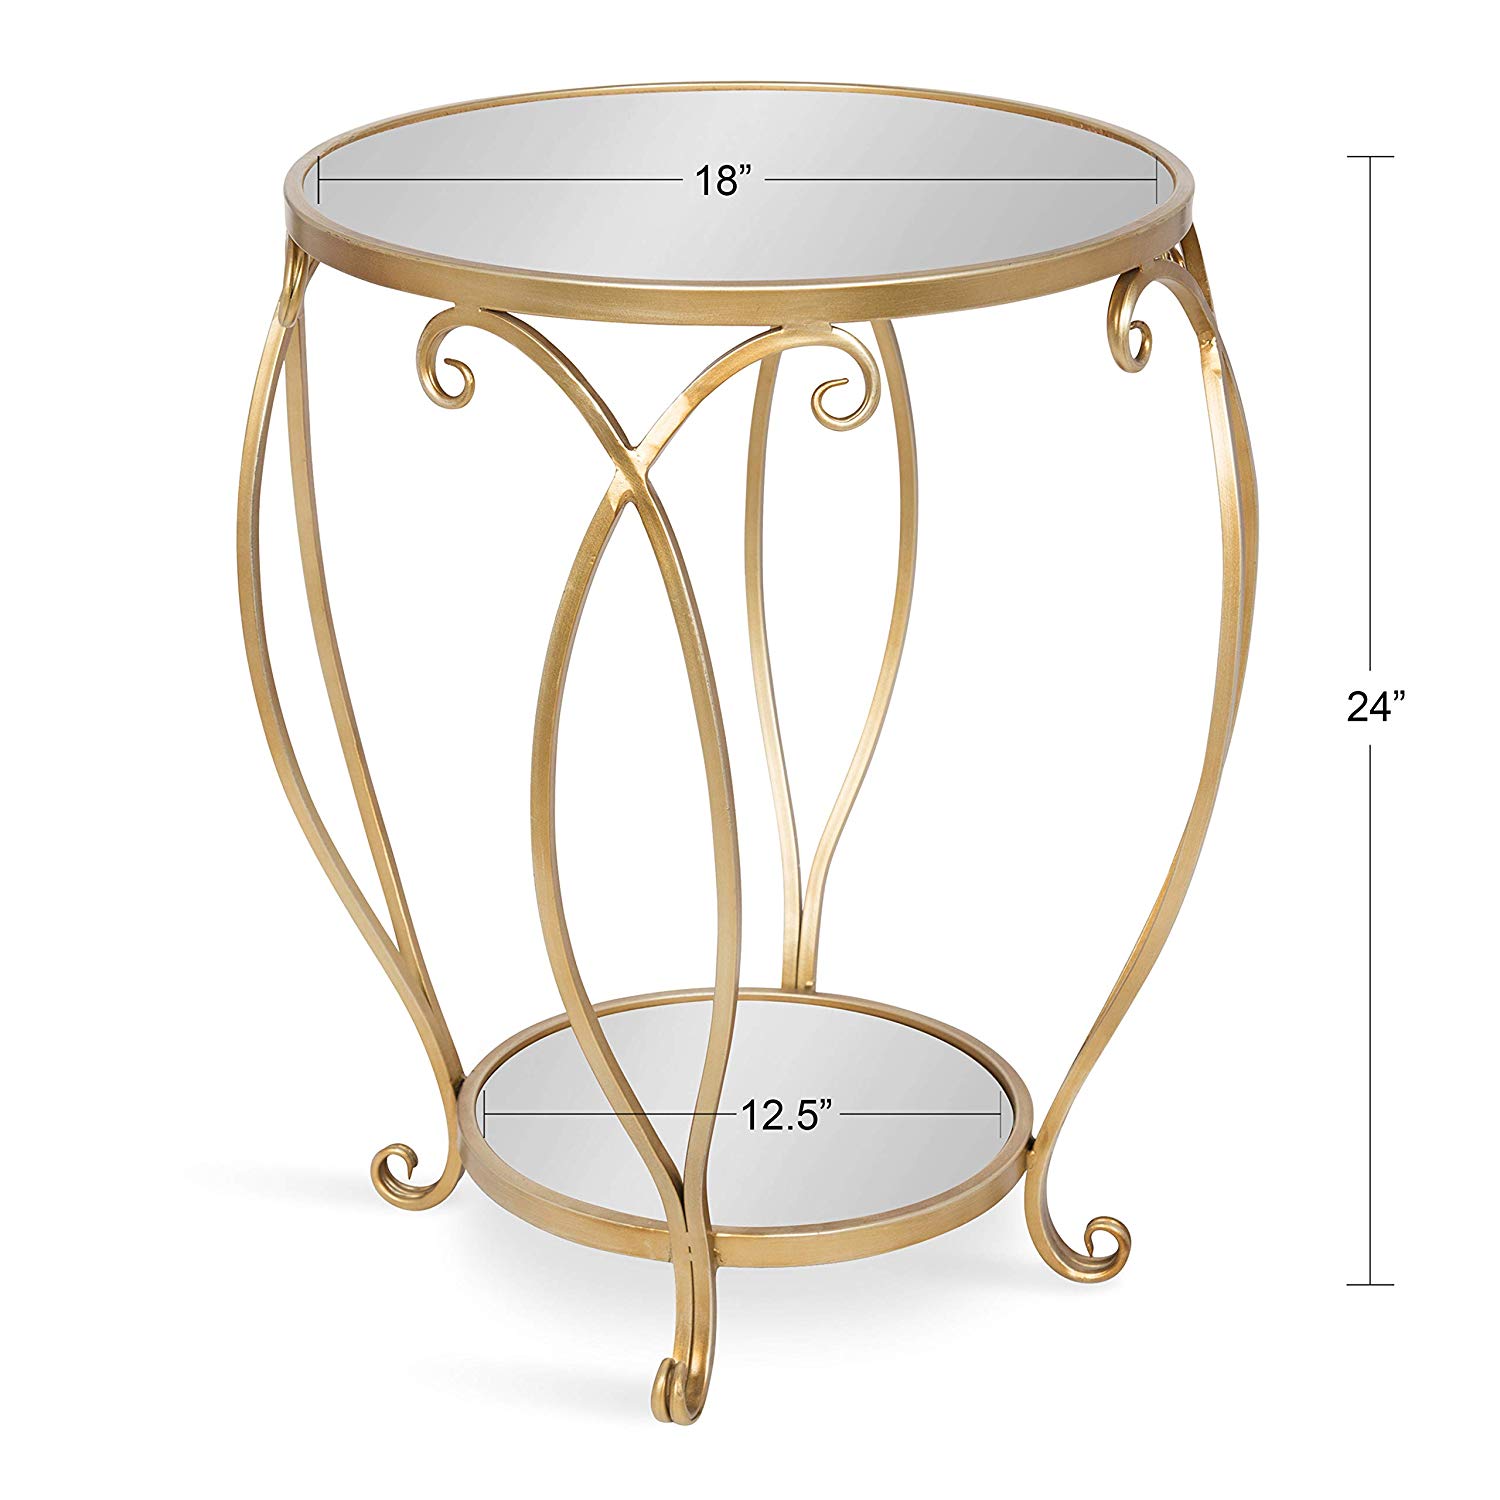 kate and laurel marilisa modern luxe round mirrored clarissa metal accent table with shelf gold kitchen dining skinny glass tiffany stained lamp outdoor occasional tables antique